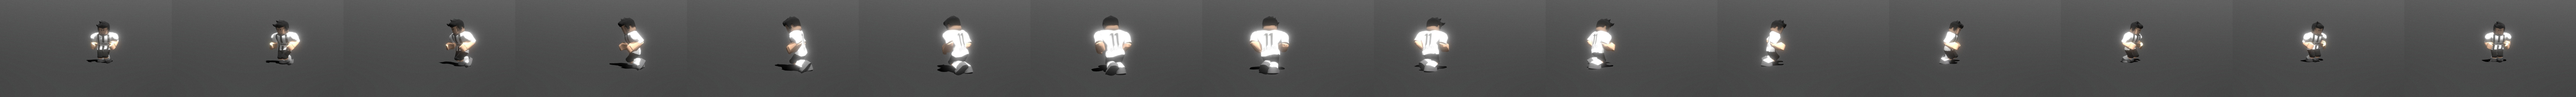 Roblox Soccer Player Animation 3d Model By Ars 3d M Arsyi Fathirahman B4ae453 - player report viewer roblox